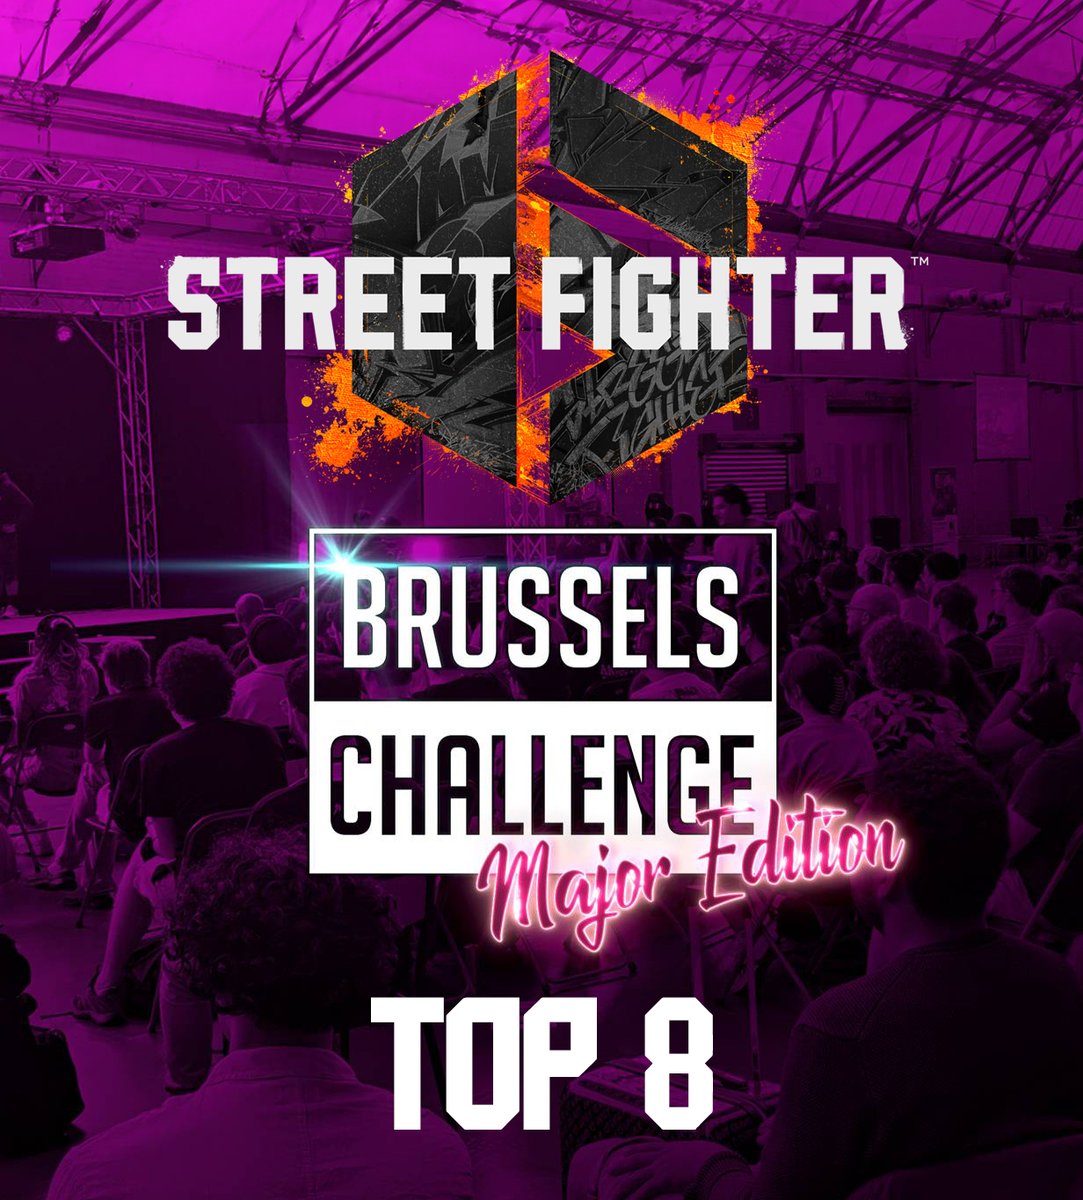 Top 8 of #BrusselsChallenge is LIVE! Head over to Twitch.tv/reversalgg now for some premium SF6 tournament action!